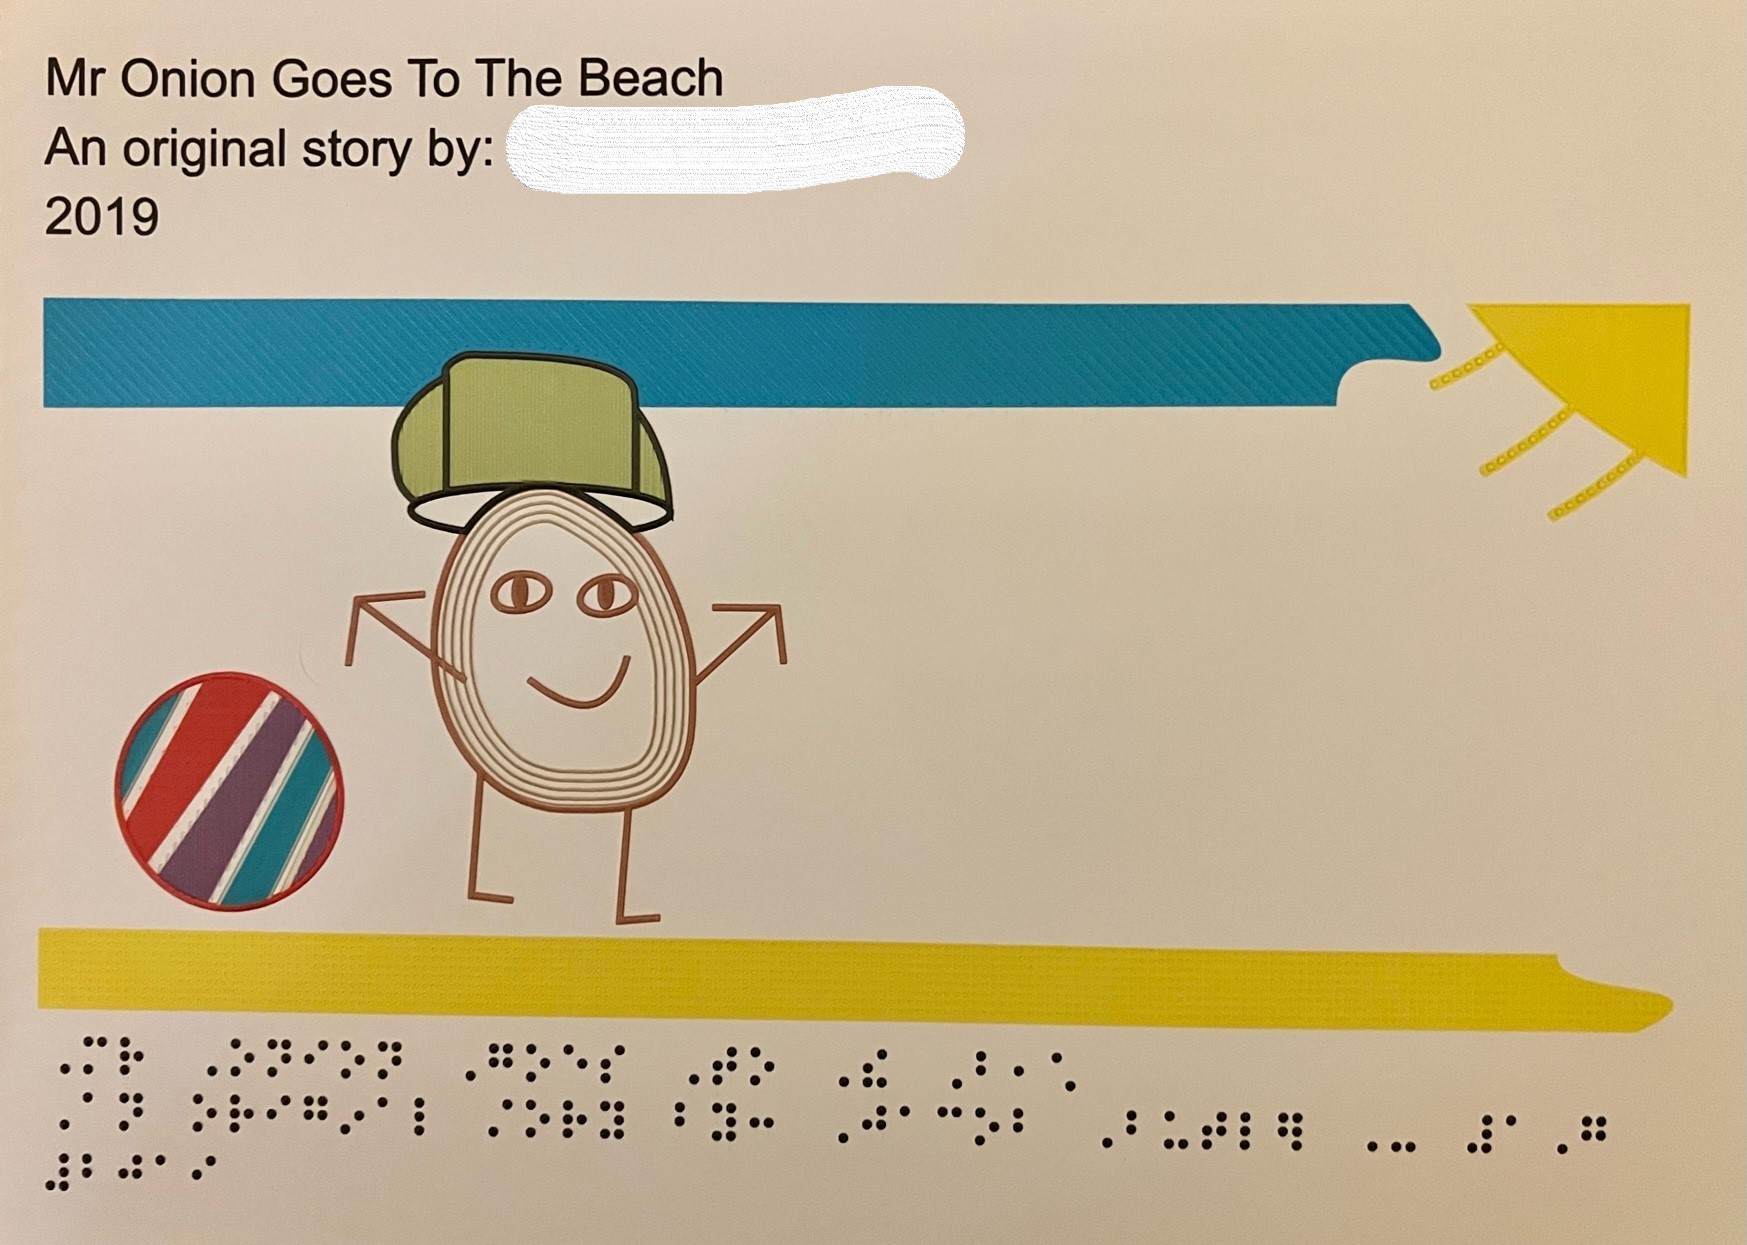 "Front cover of Mr Onion Goes to the Beach. It shows Mr. Onion on sand next to a beach ball with the ocean behind him. The cover is accessible with raised colouring on the picture and braille underneath."